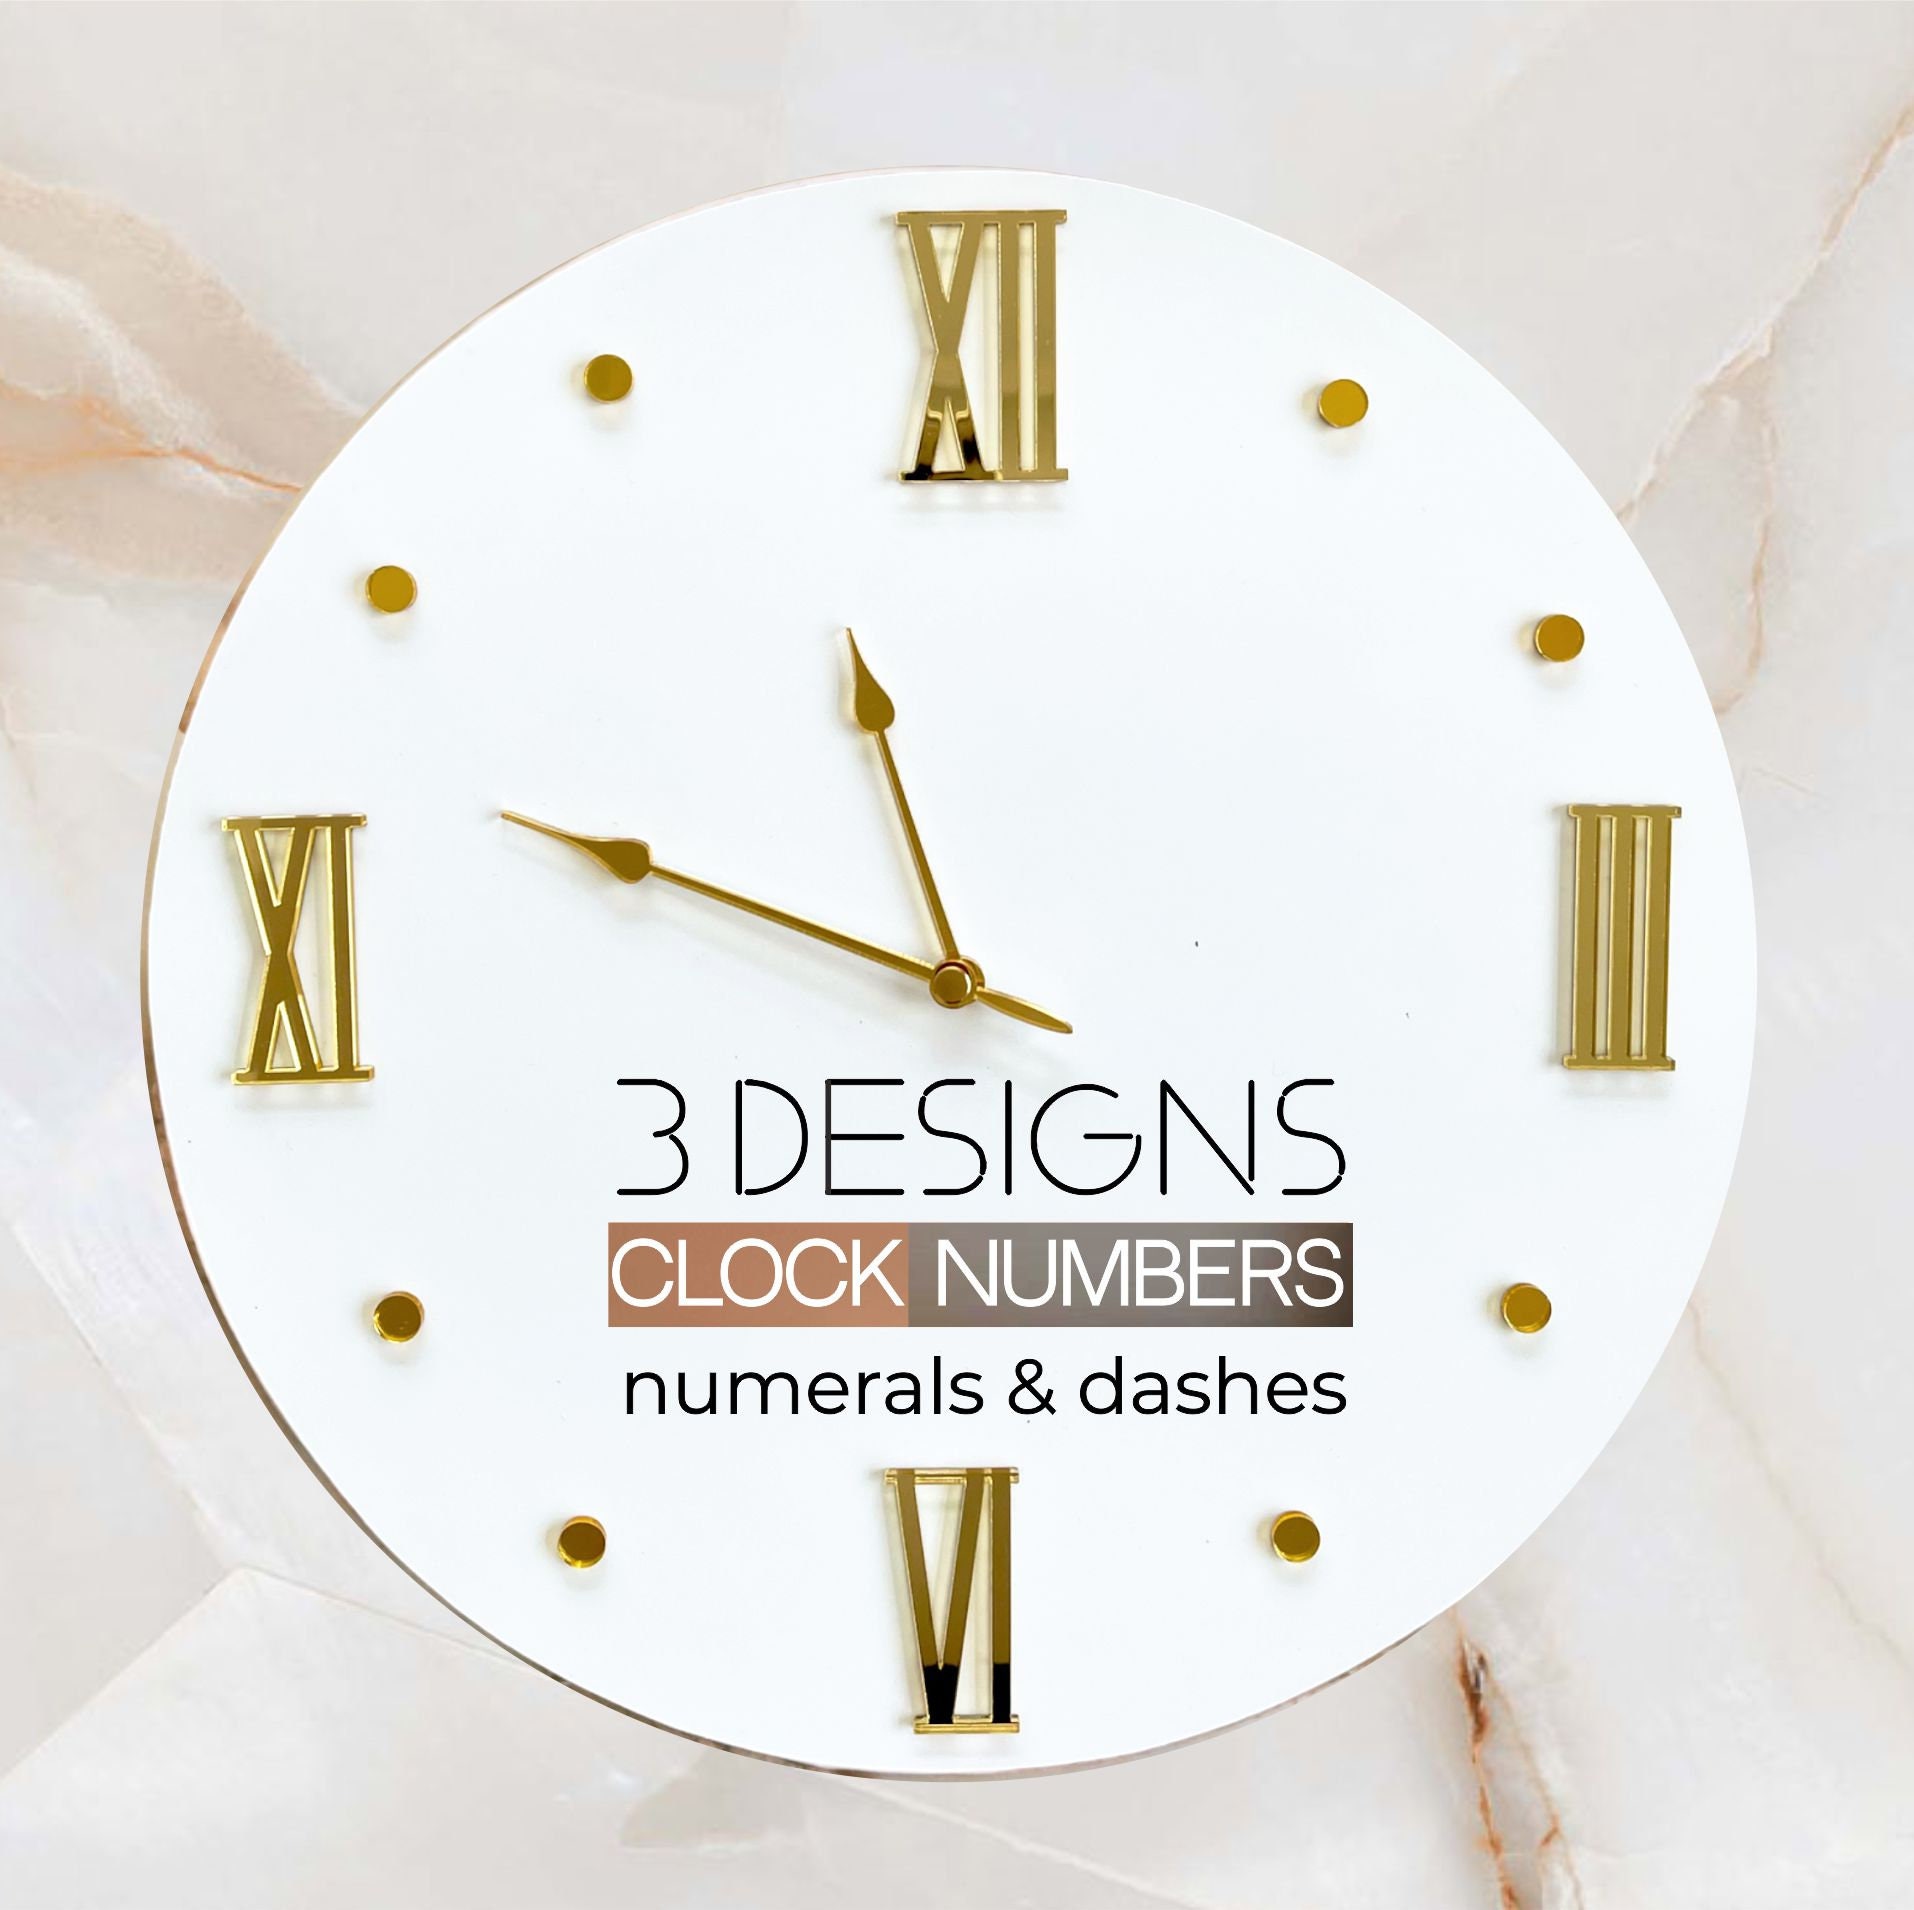 Large Clock Resin Mold 15, Shiny Resin Silicone Mold, Giant Roman Numerals Clock  Mold, Decorative Wall Clock With Numbers Molds Set 